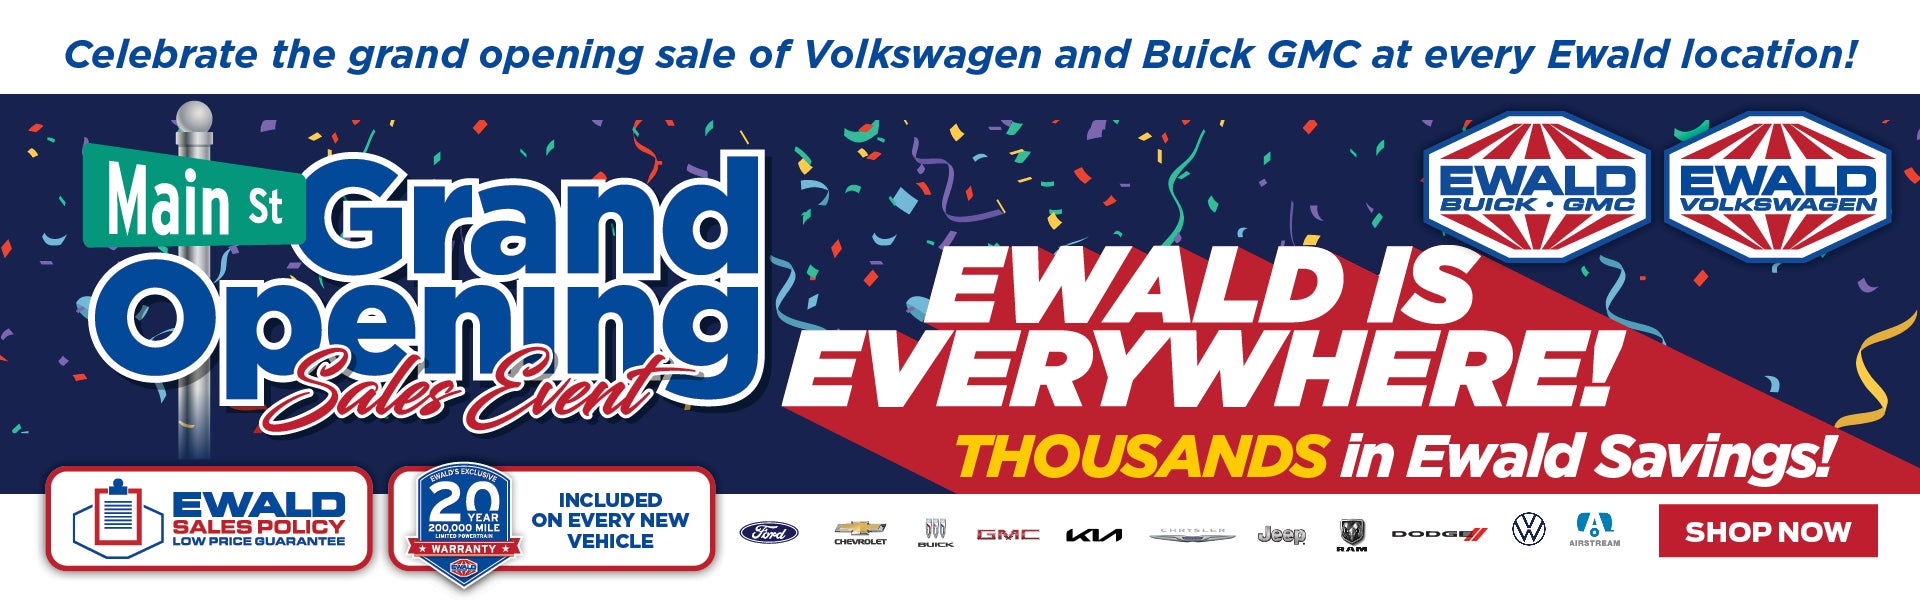 Ewald's Grand Opening Sales Event